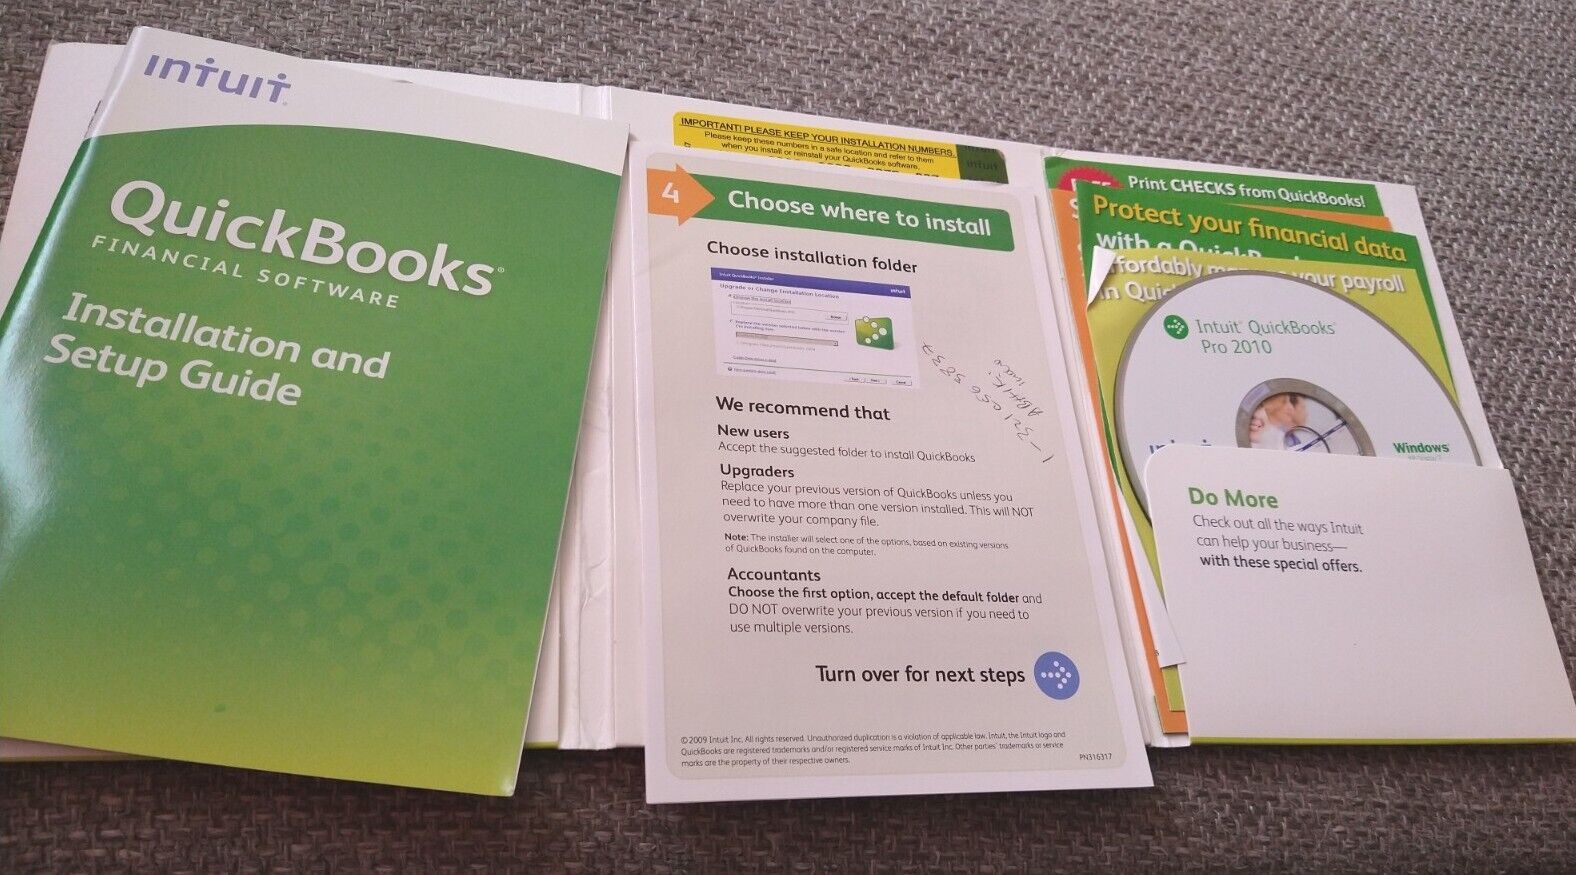 INTUIT QUICKBOOKS PRO 2010 FOR WINDOWS FULL RETAIL US VERSION Sold As Working